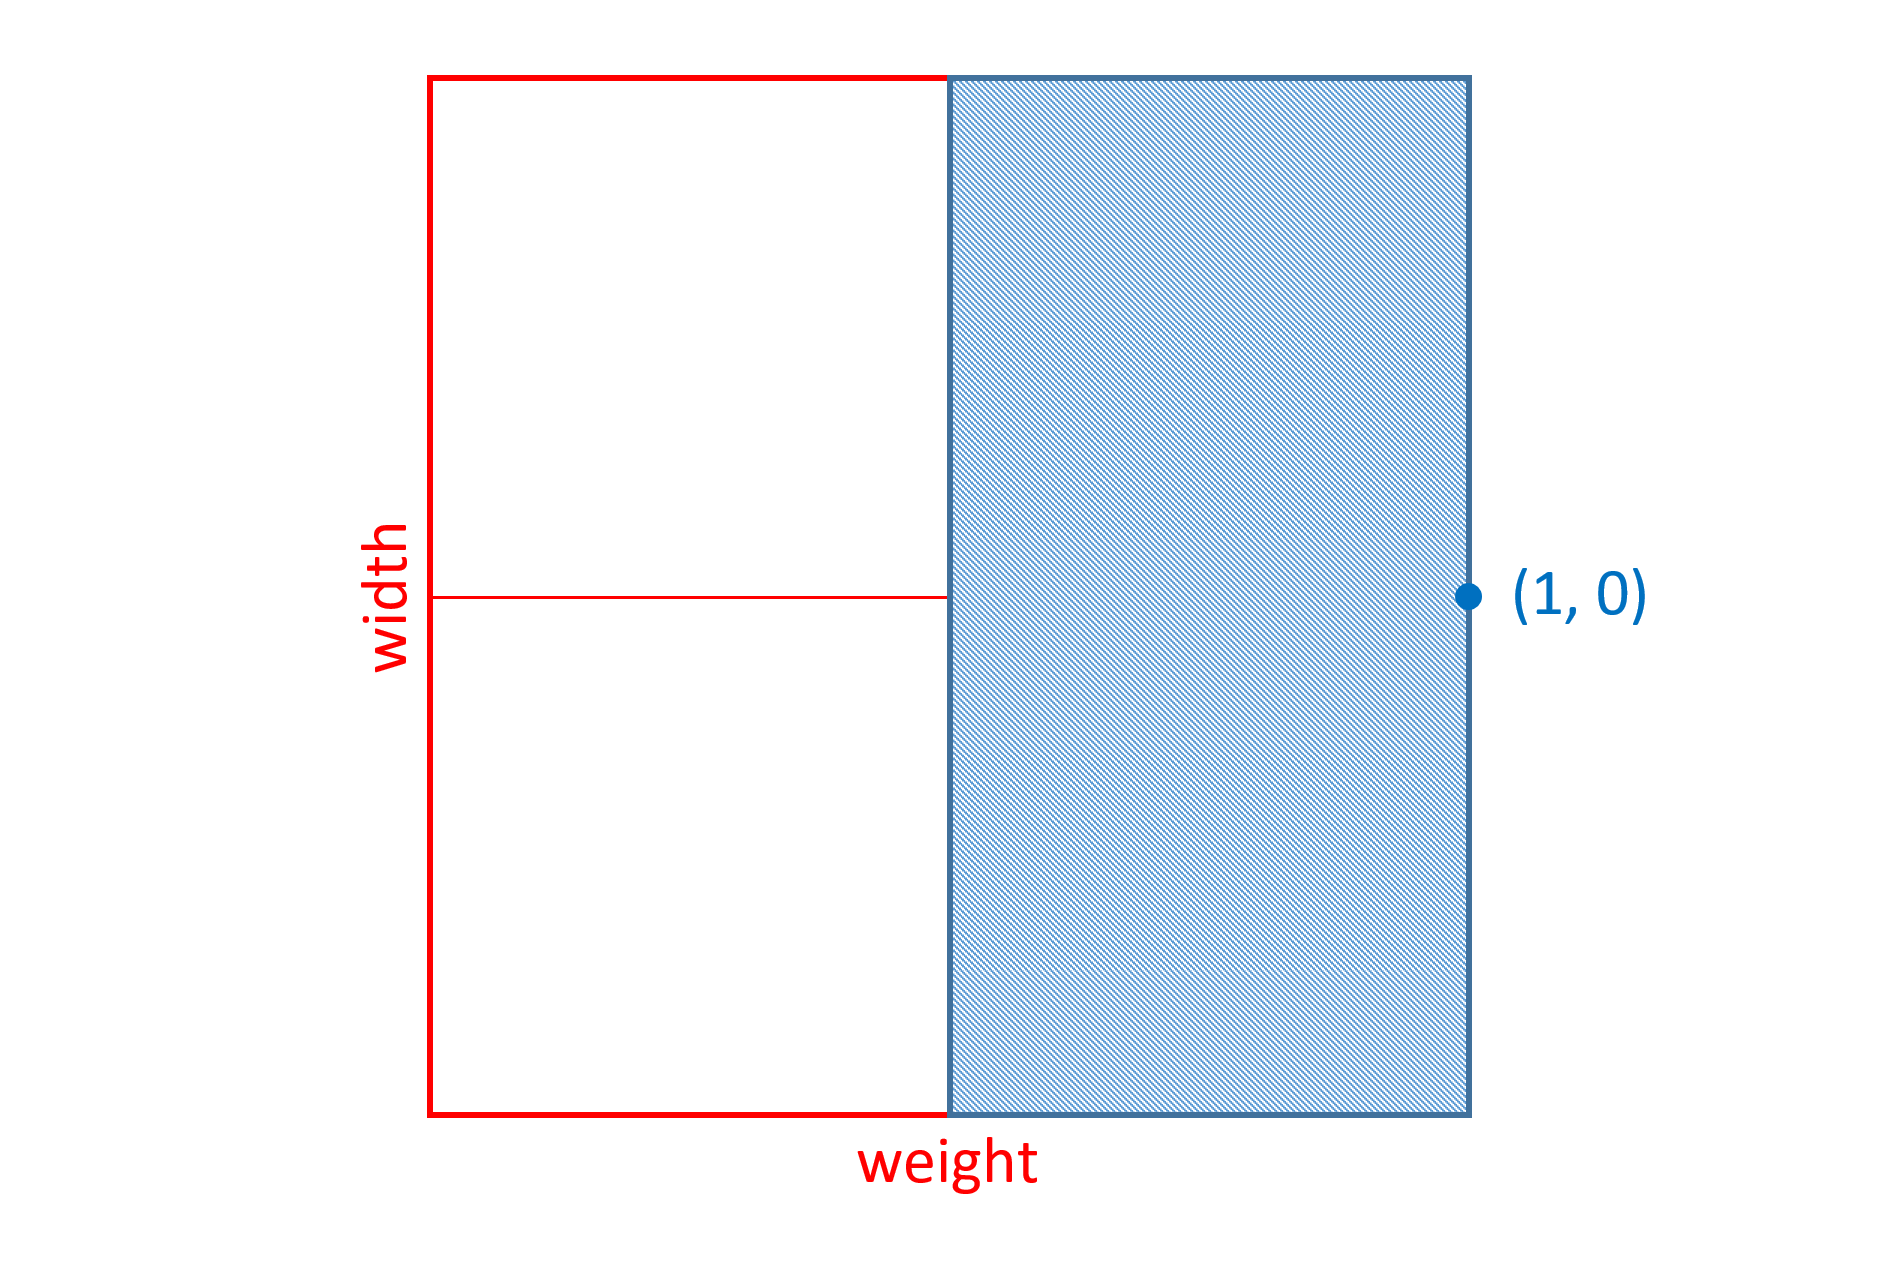 A region in a Cartesian space covering the two right quadrants